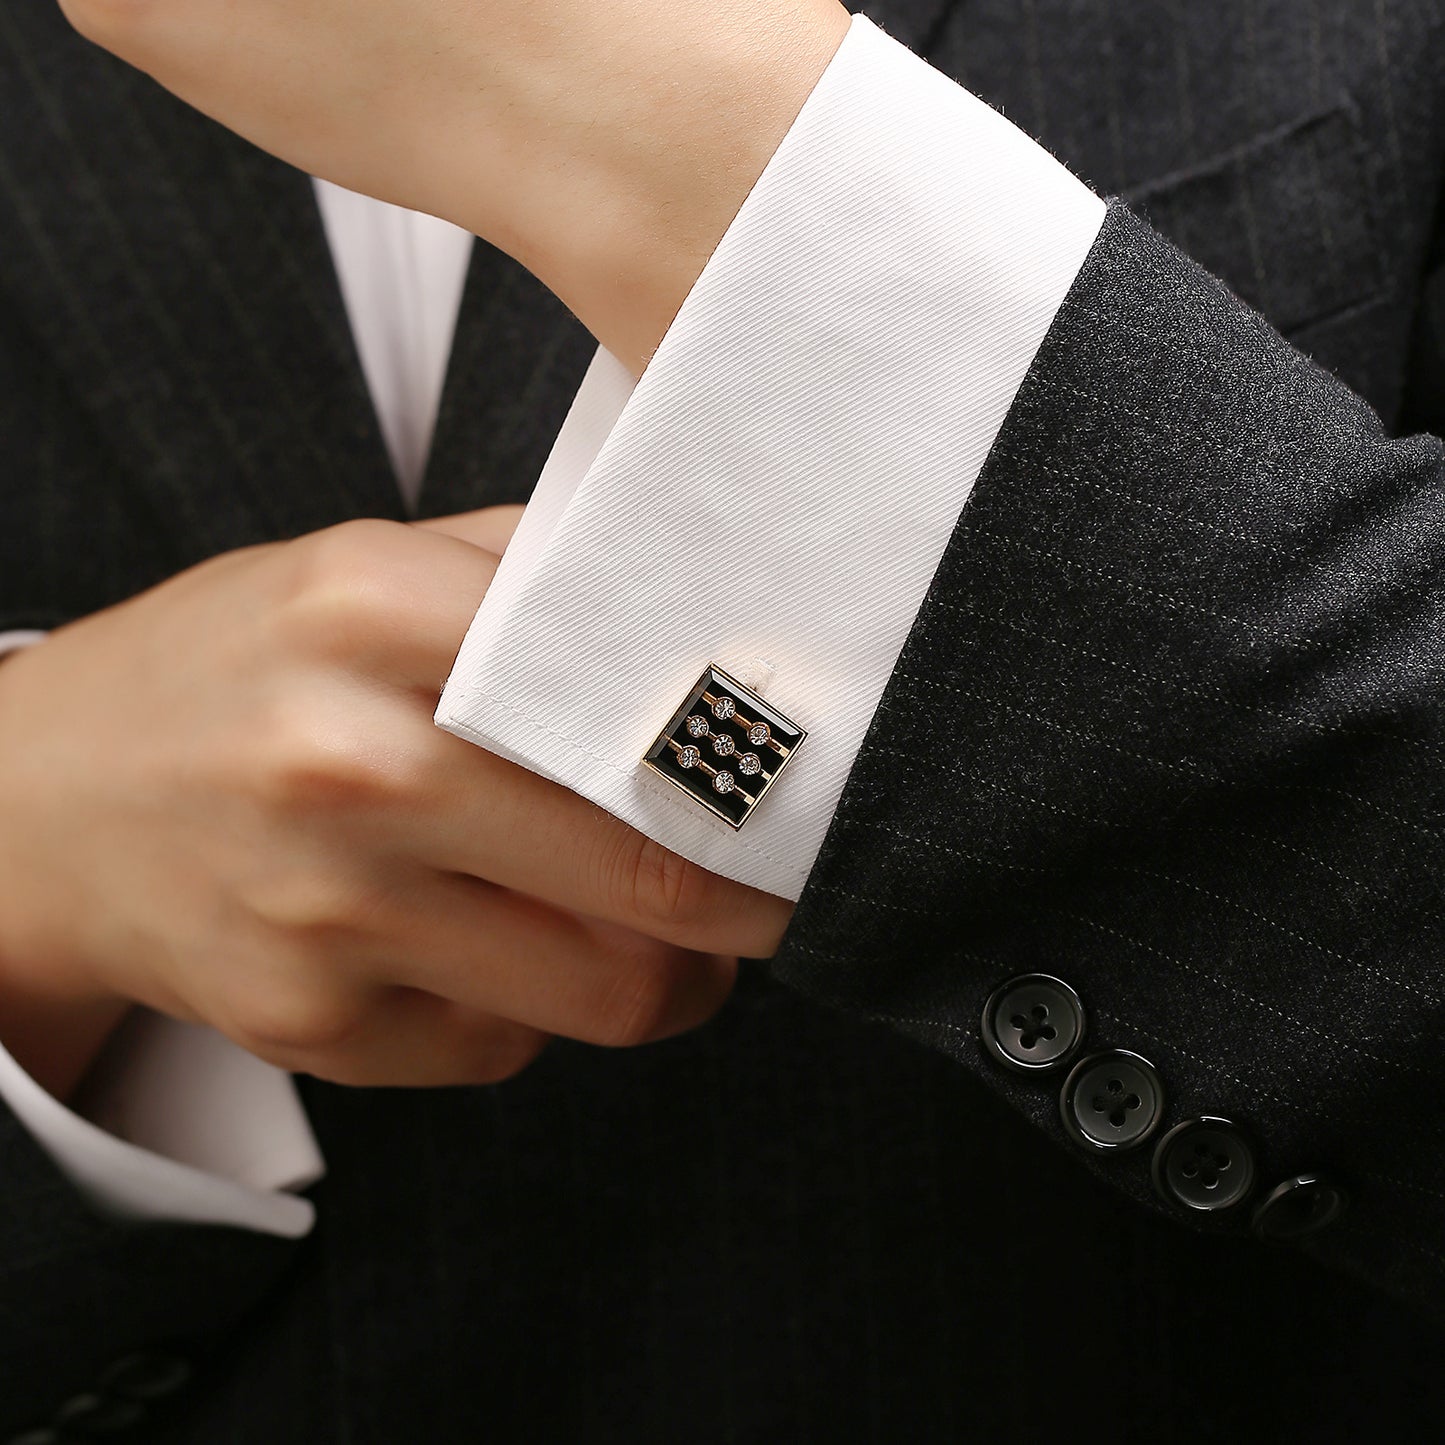 High-Quality Diamond-Studded Rose Gold Simple And Fashionable French Cufflinks